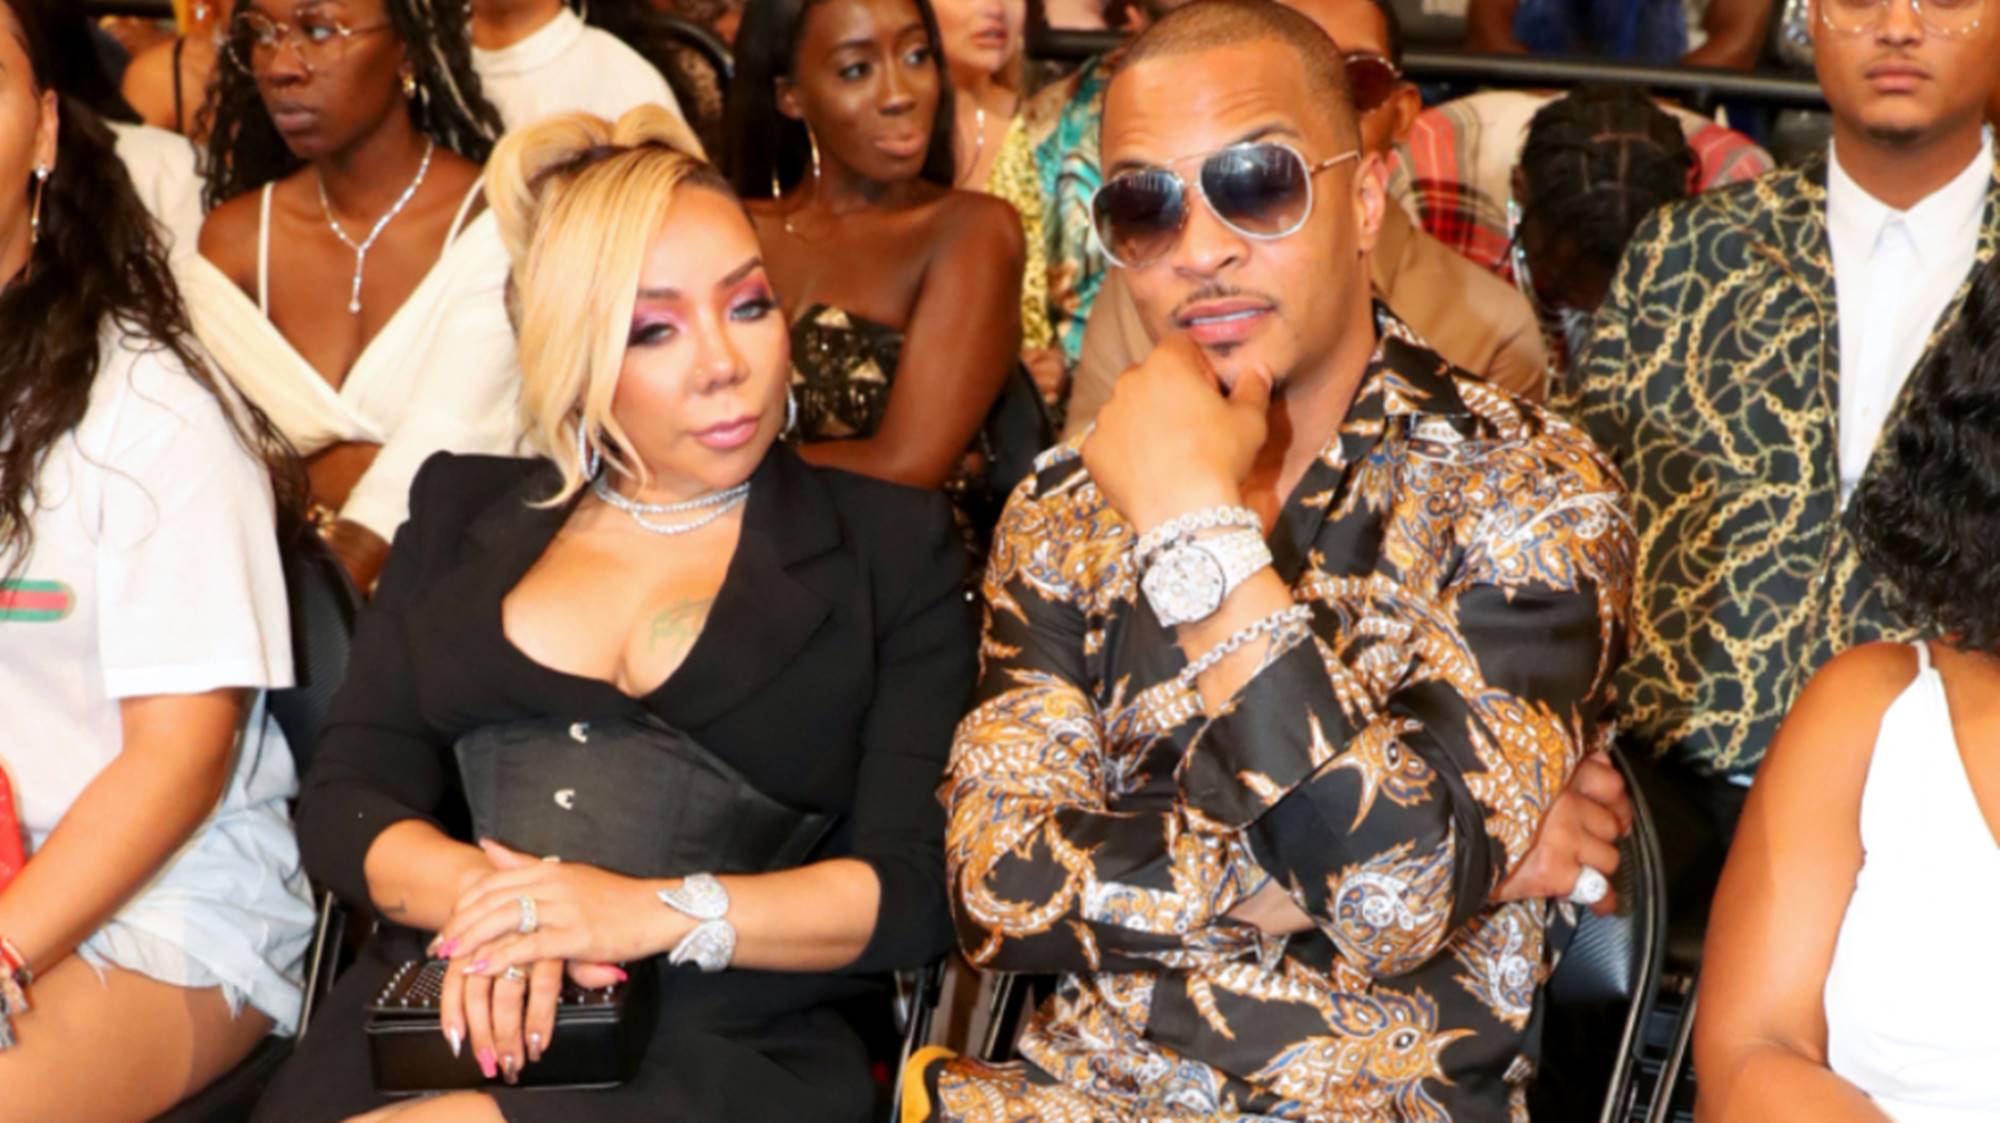 T.I. Has Some Things To Say To Sabrina Peterson - Check Out His Messages